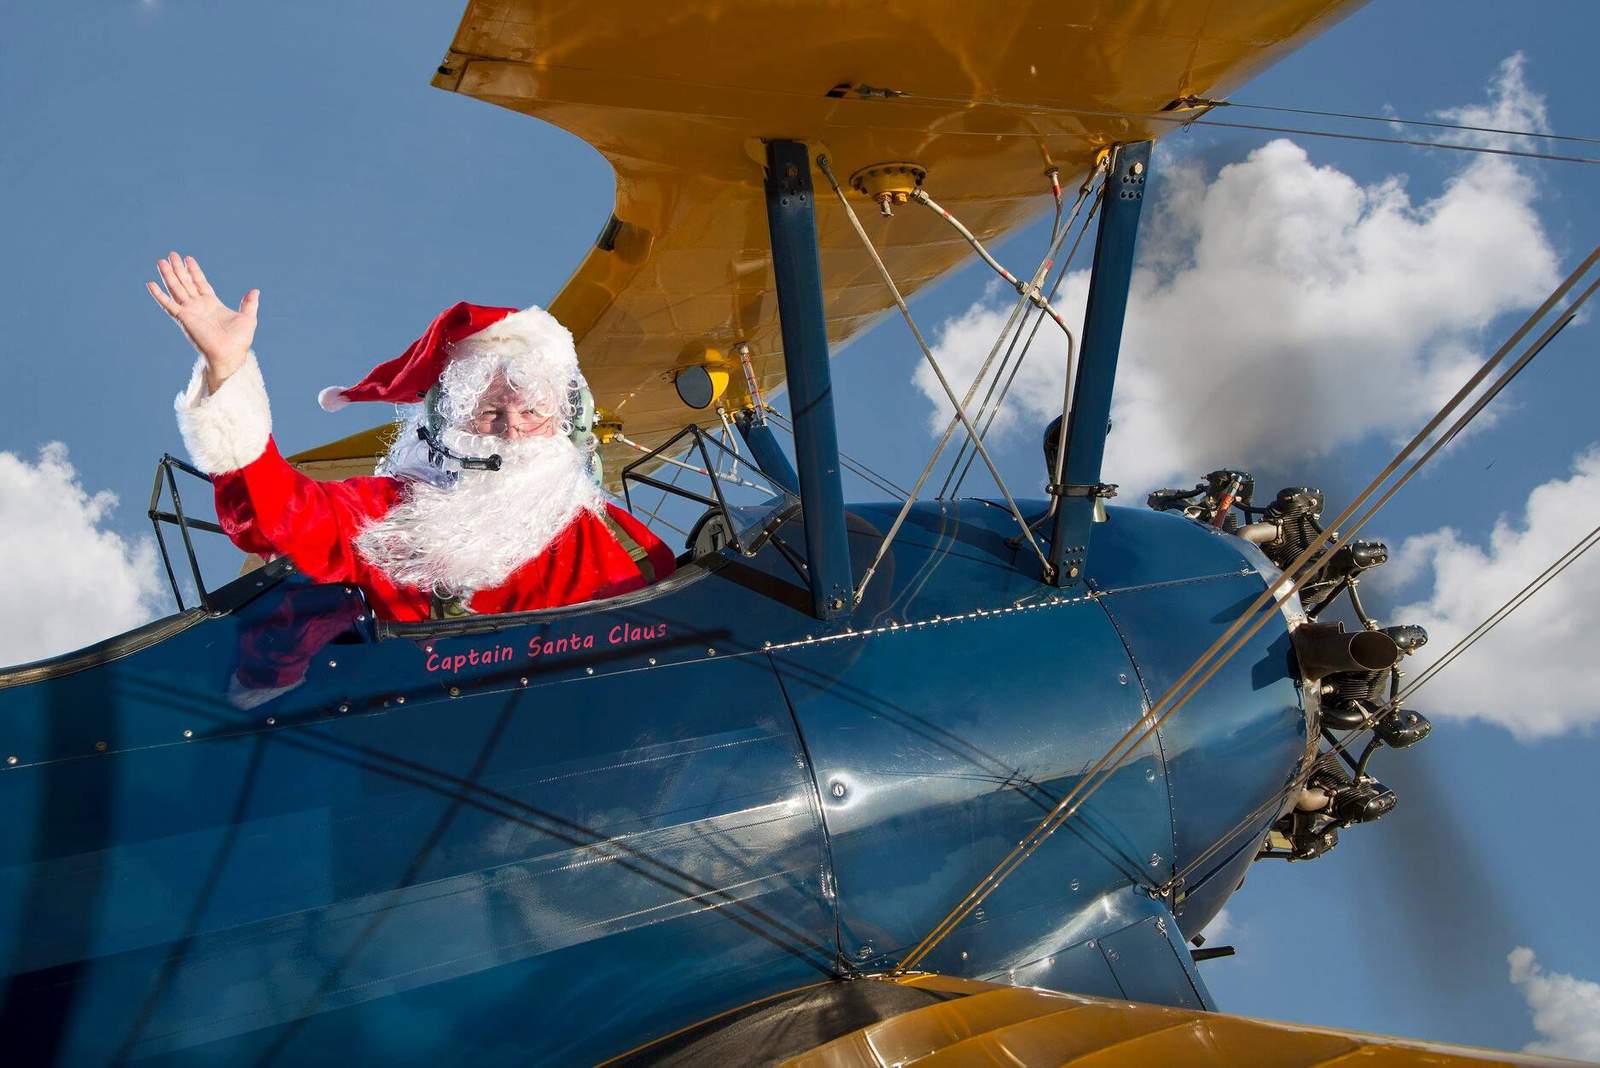 So much for a sleigh! Stearman Santa soars into Houston for festive photo-ops